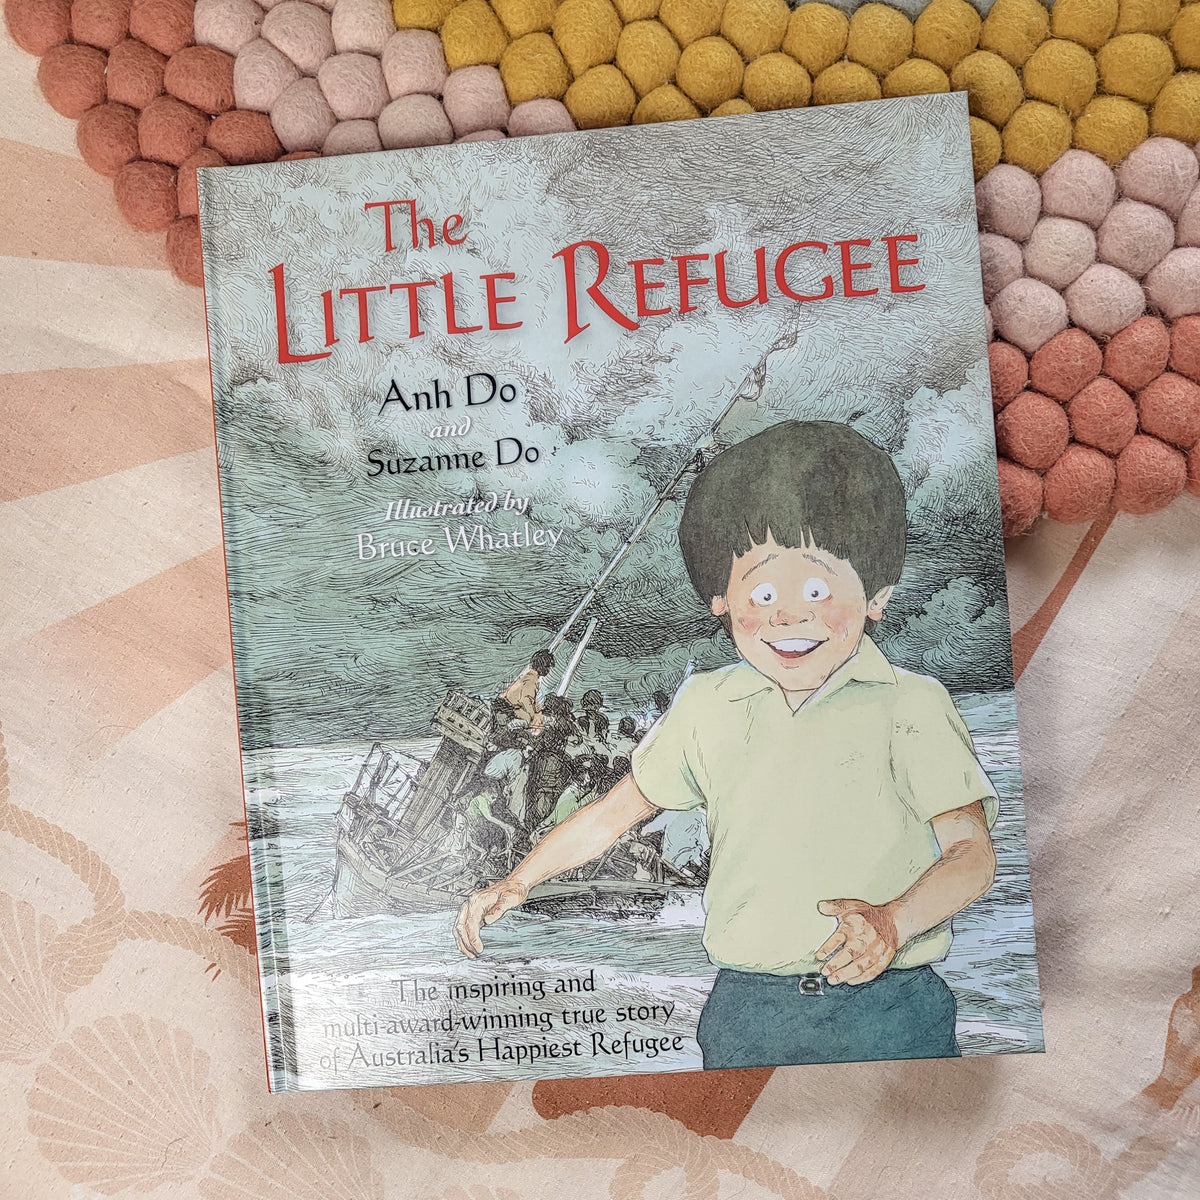 image of children's book called The Little Refugee.